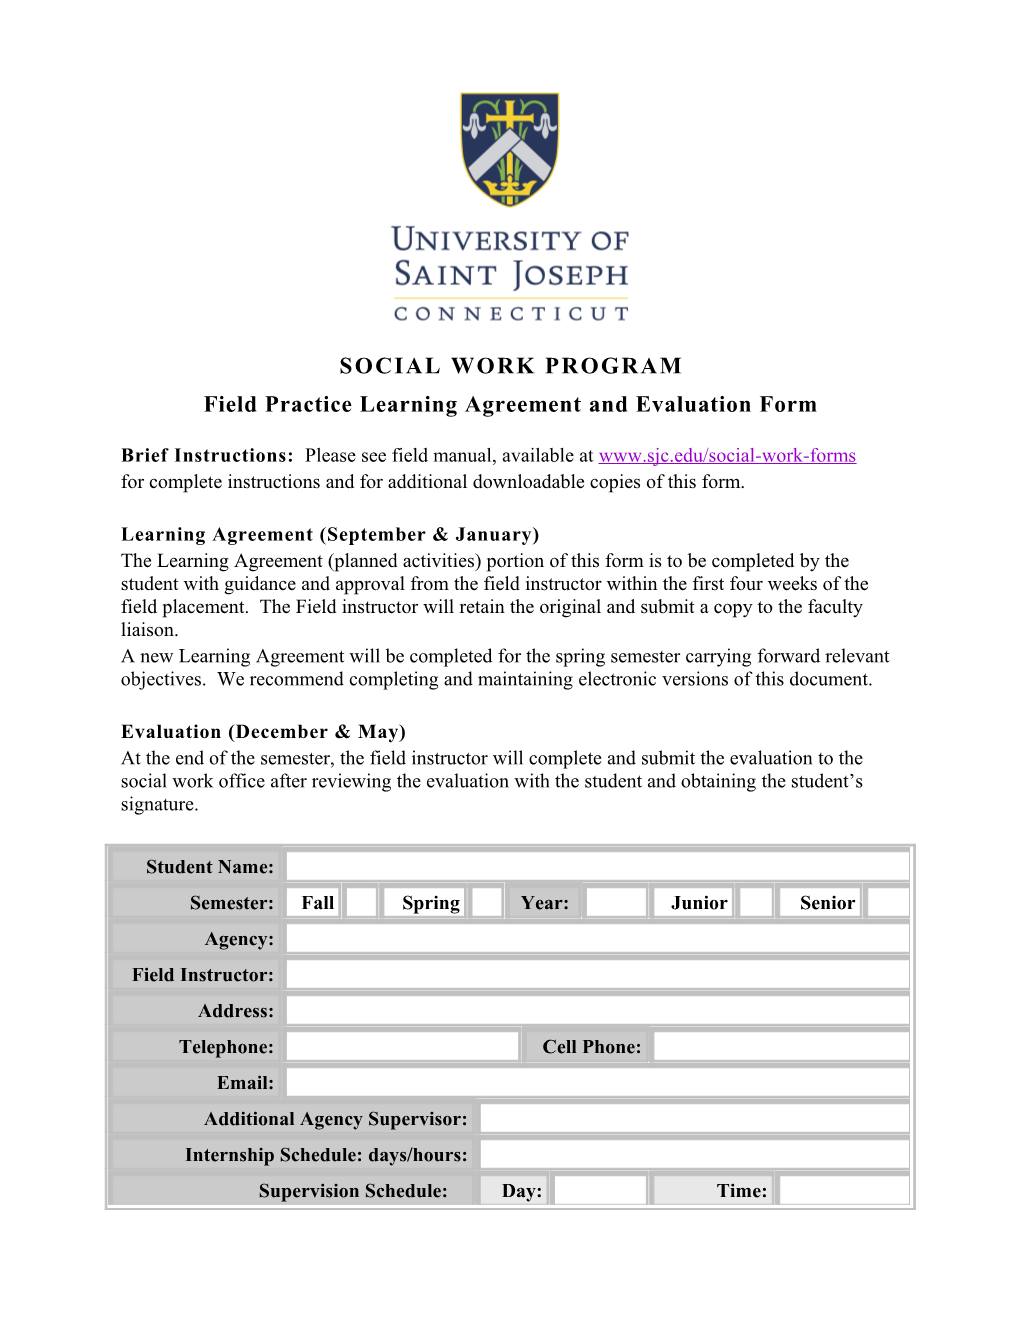 Field Practice Learning Agreement and Evaluation Form